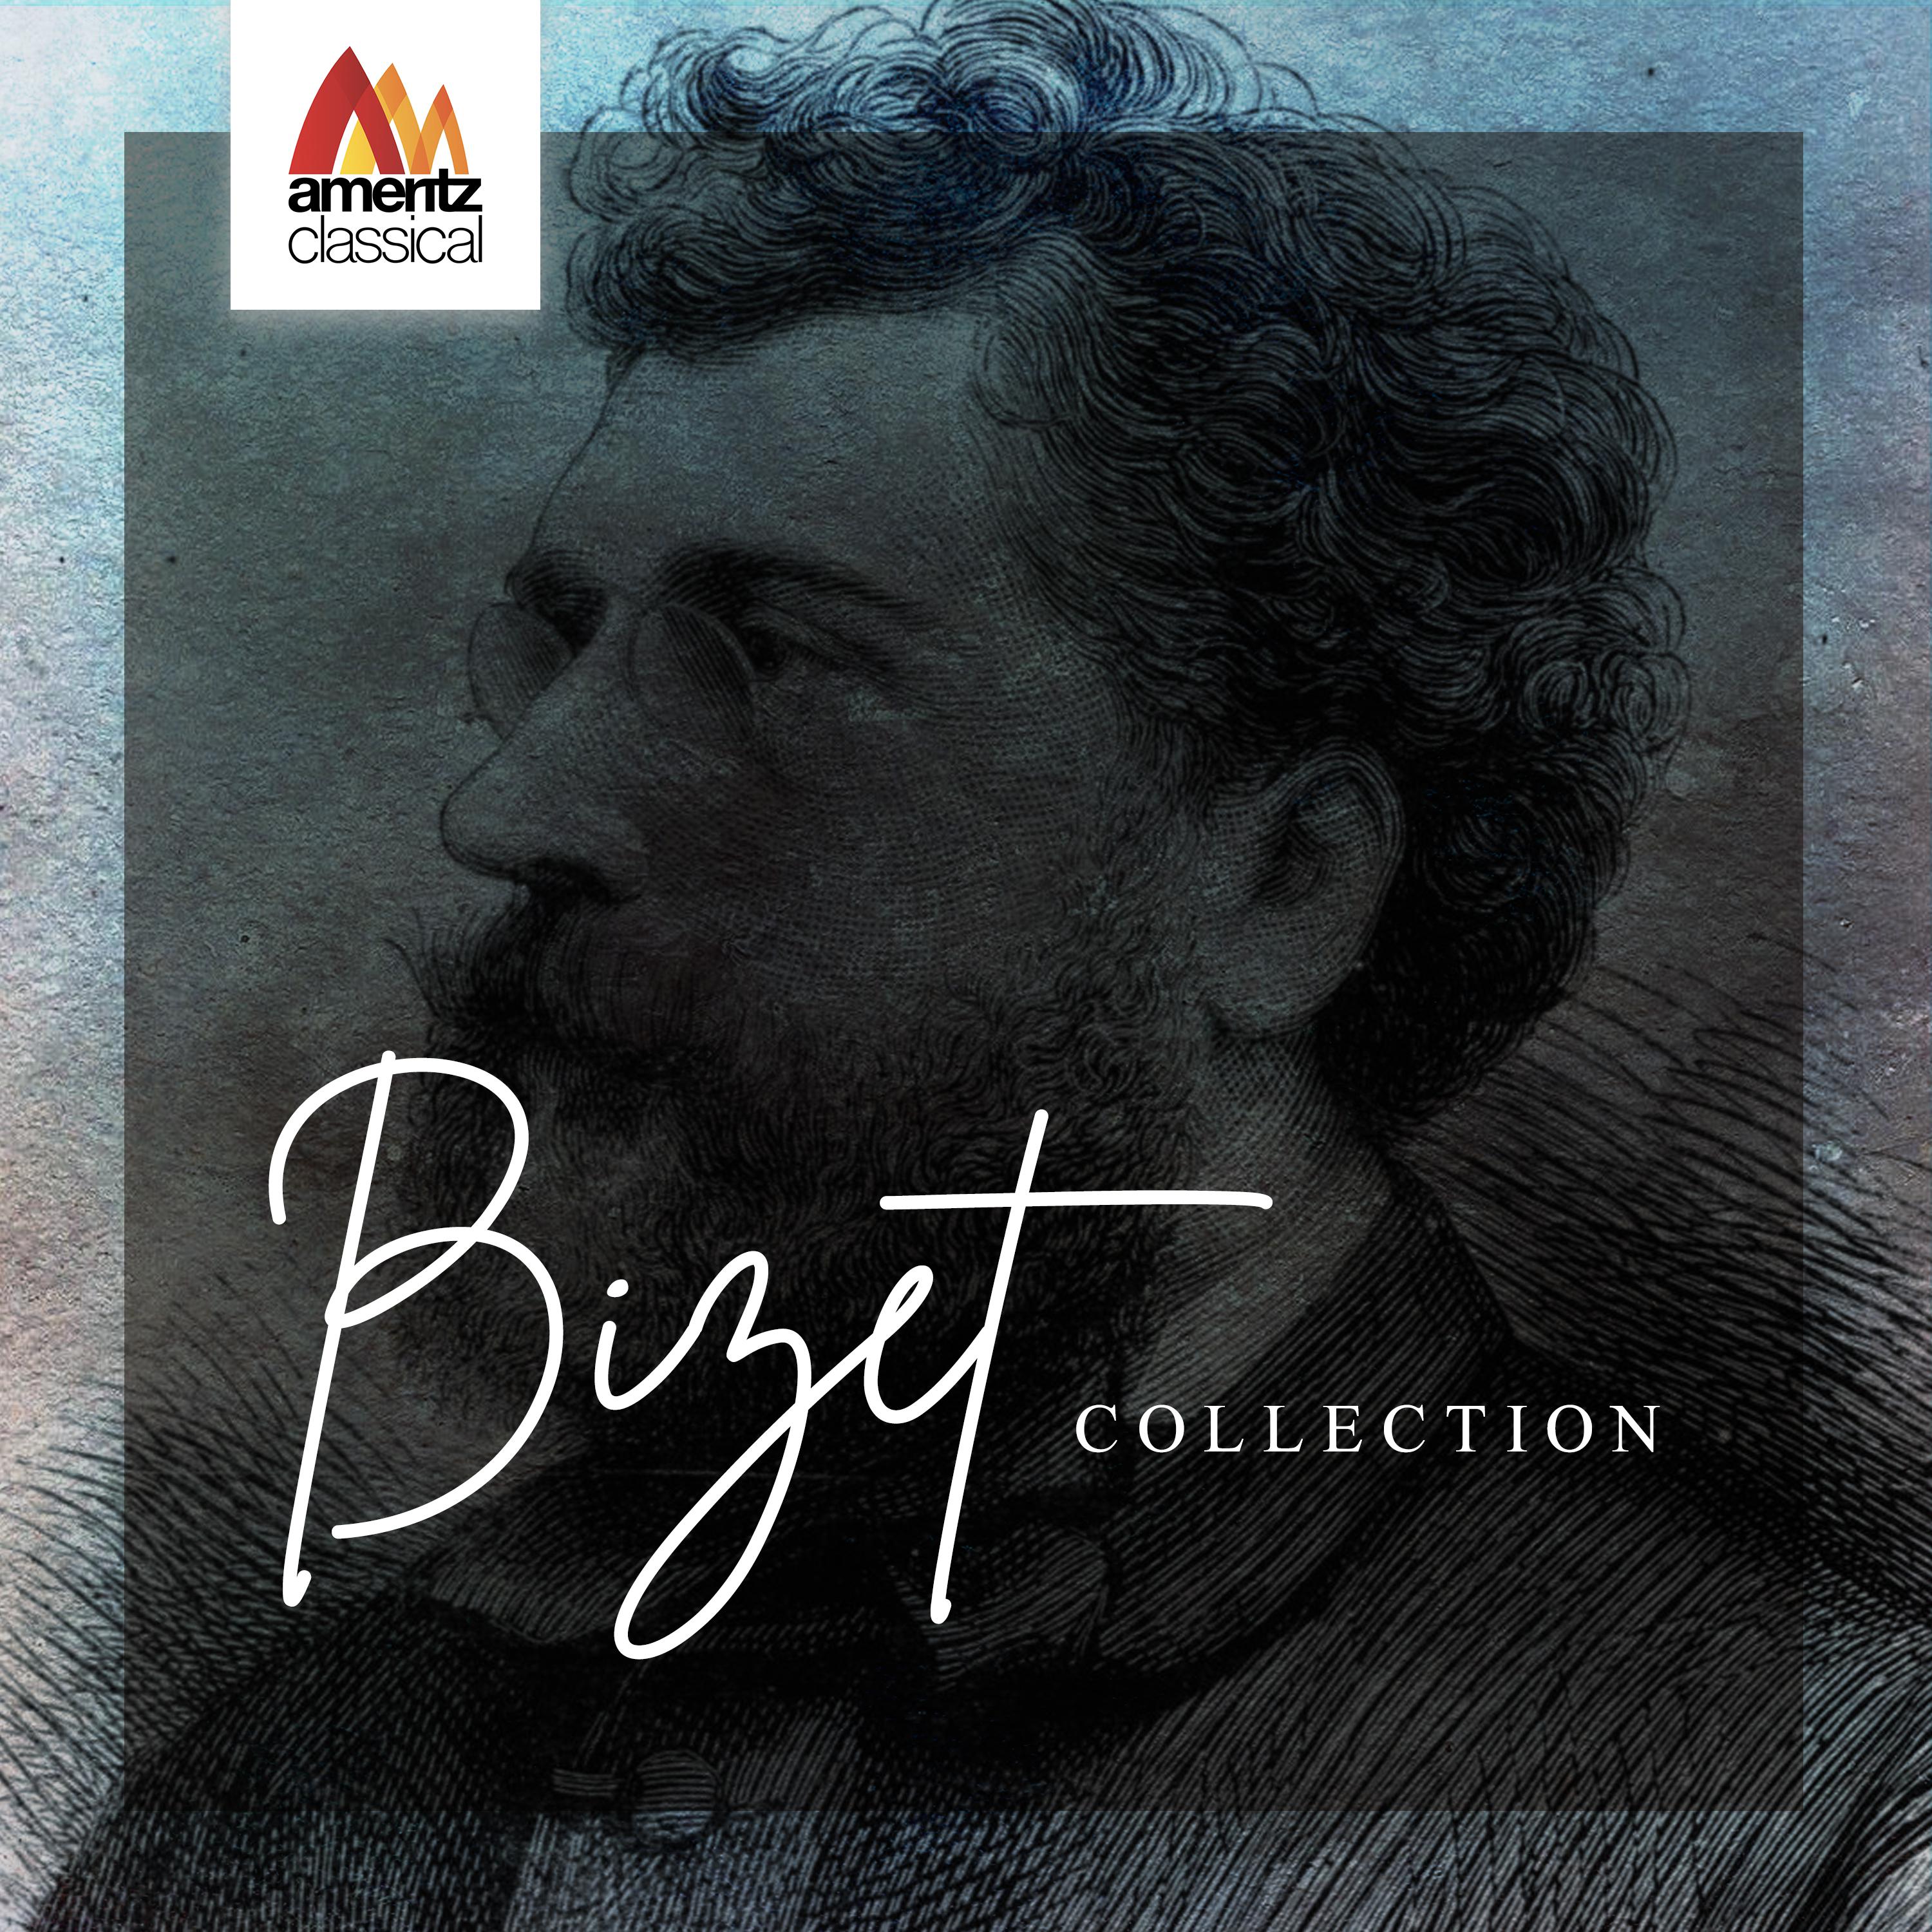 Bizet Collection